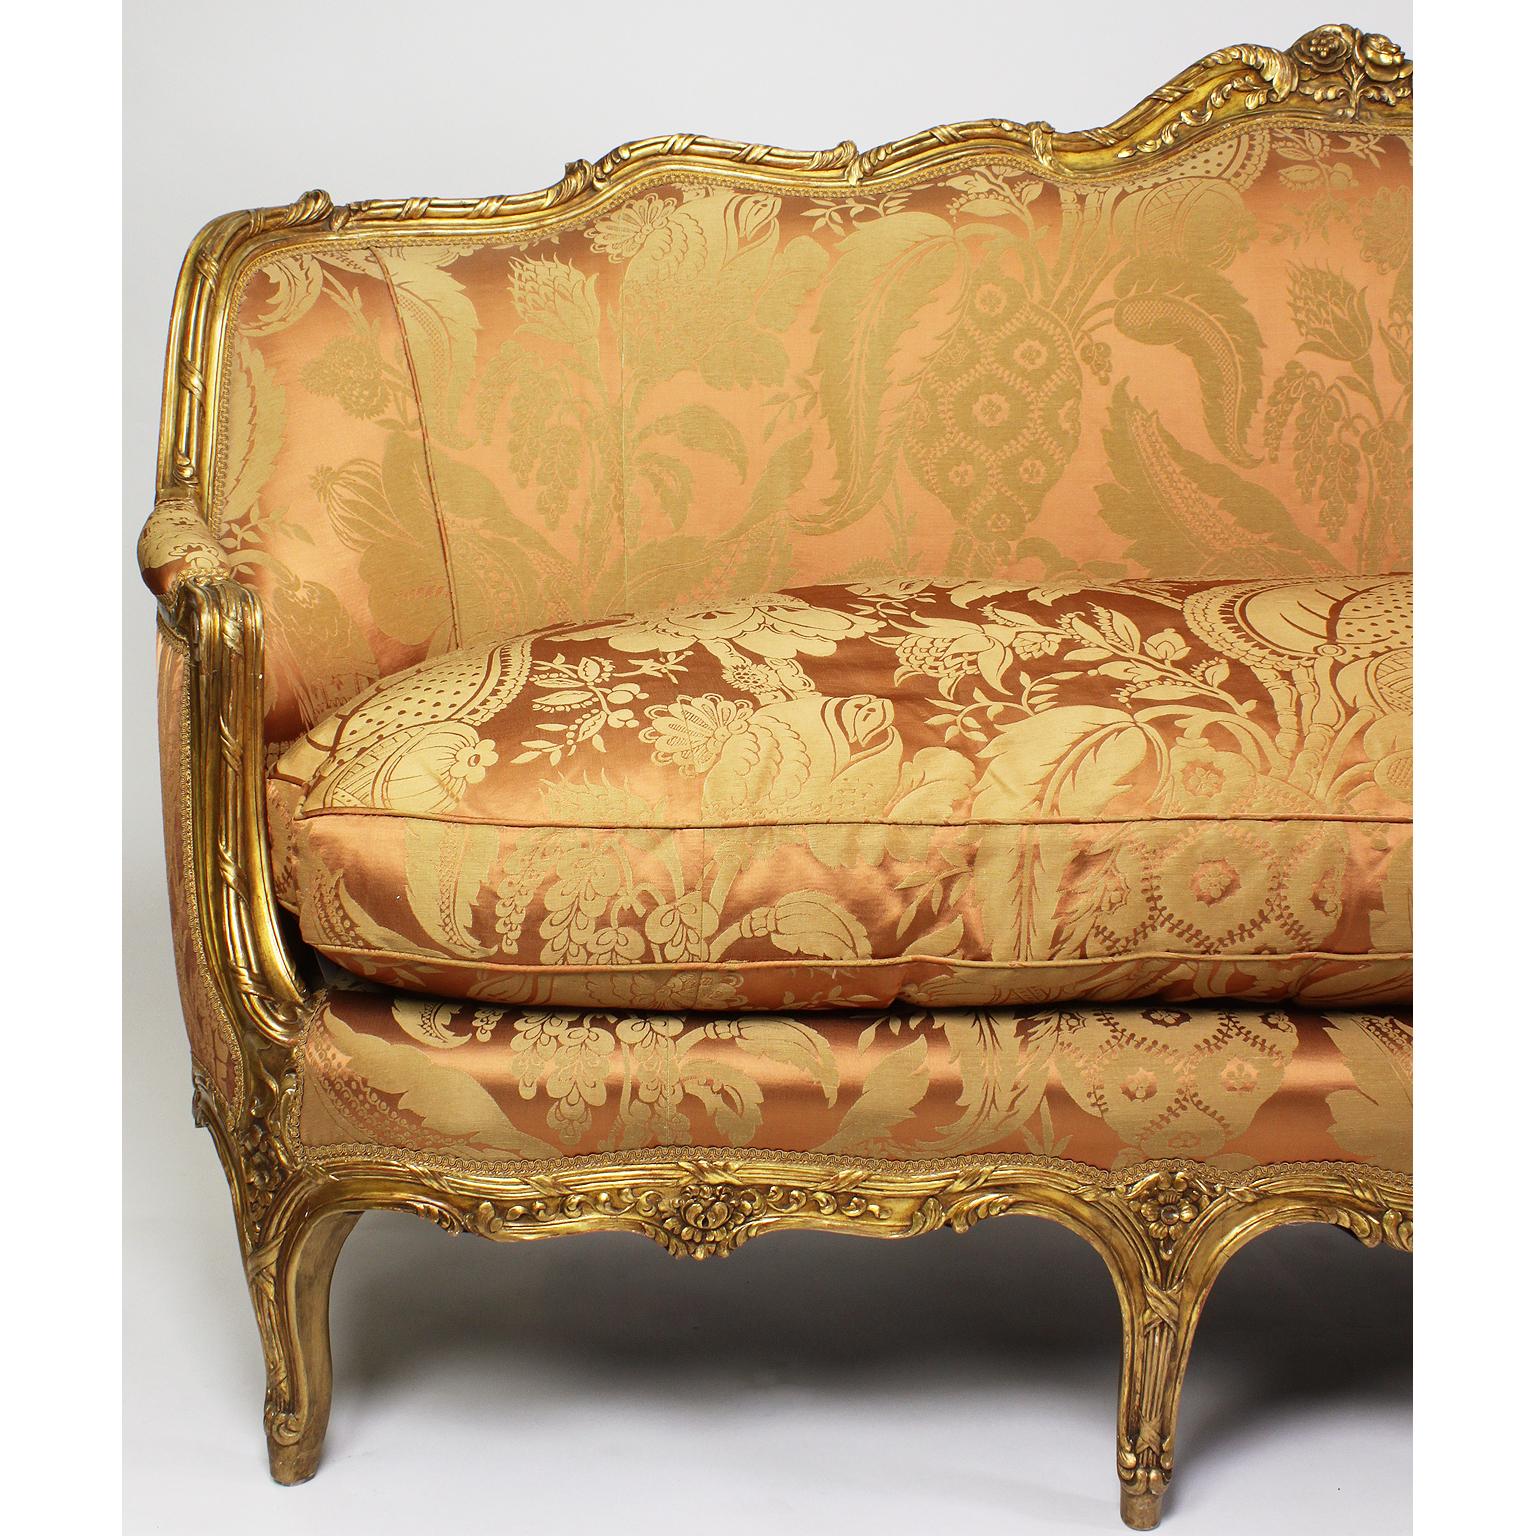 Early 20th Century Fine Louis XV Style Giltwood Carved Bergère Settee, Sofa, Attributed to Jansen